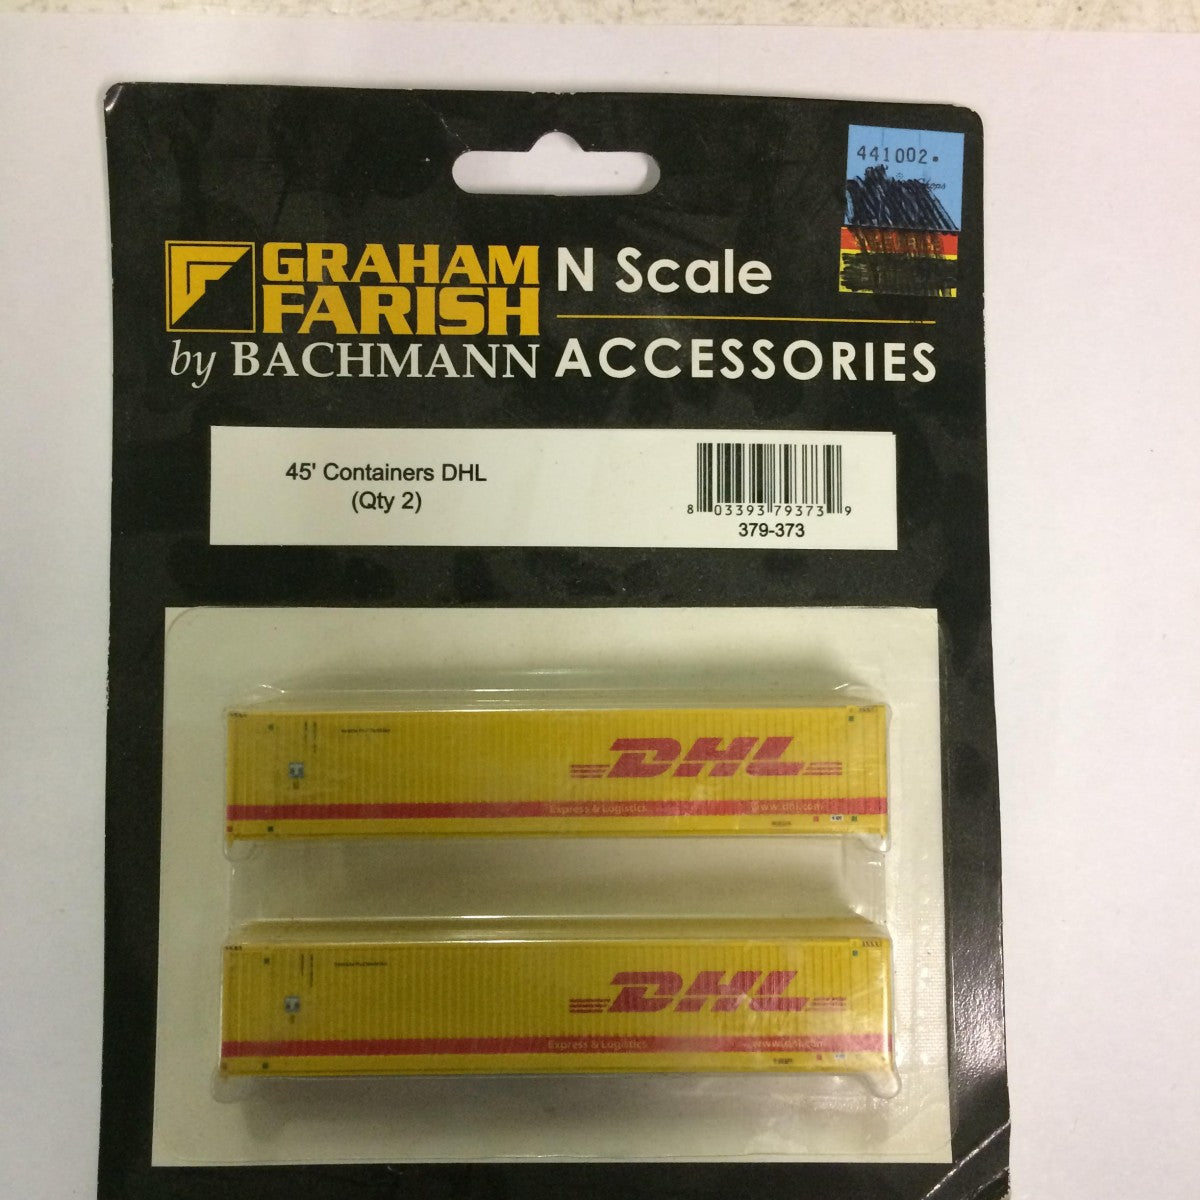 Graham Farish 379-373 N Scale 45' Containers DHL (Qty 2)